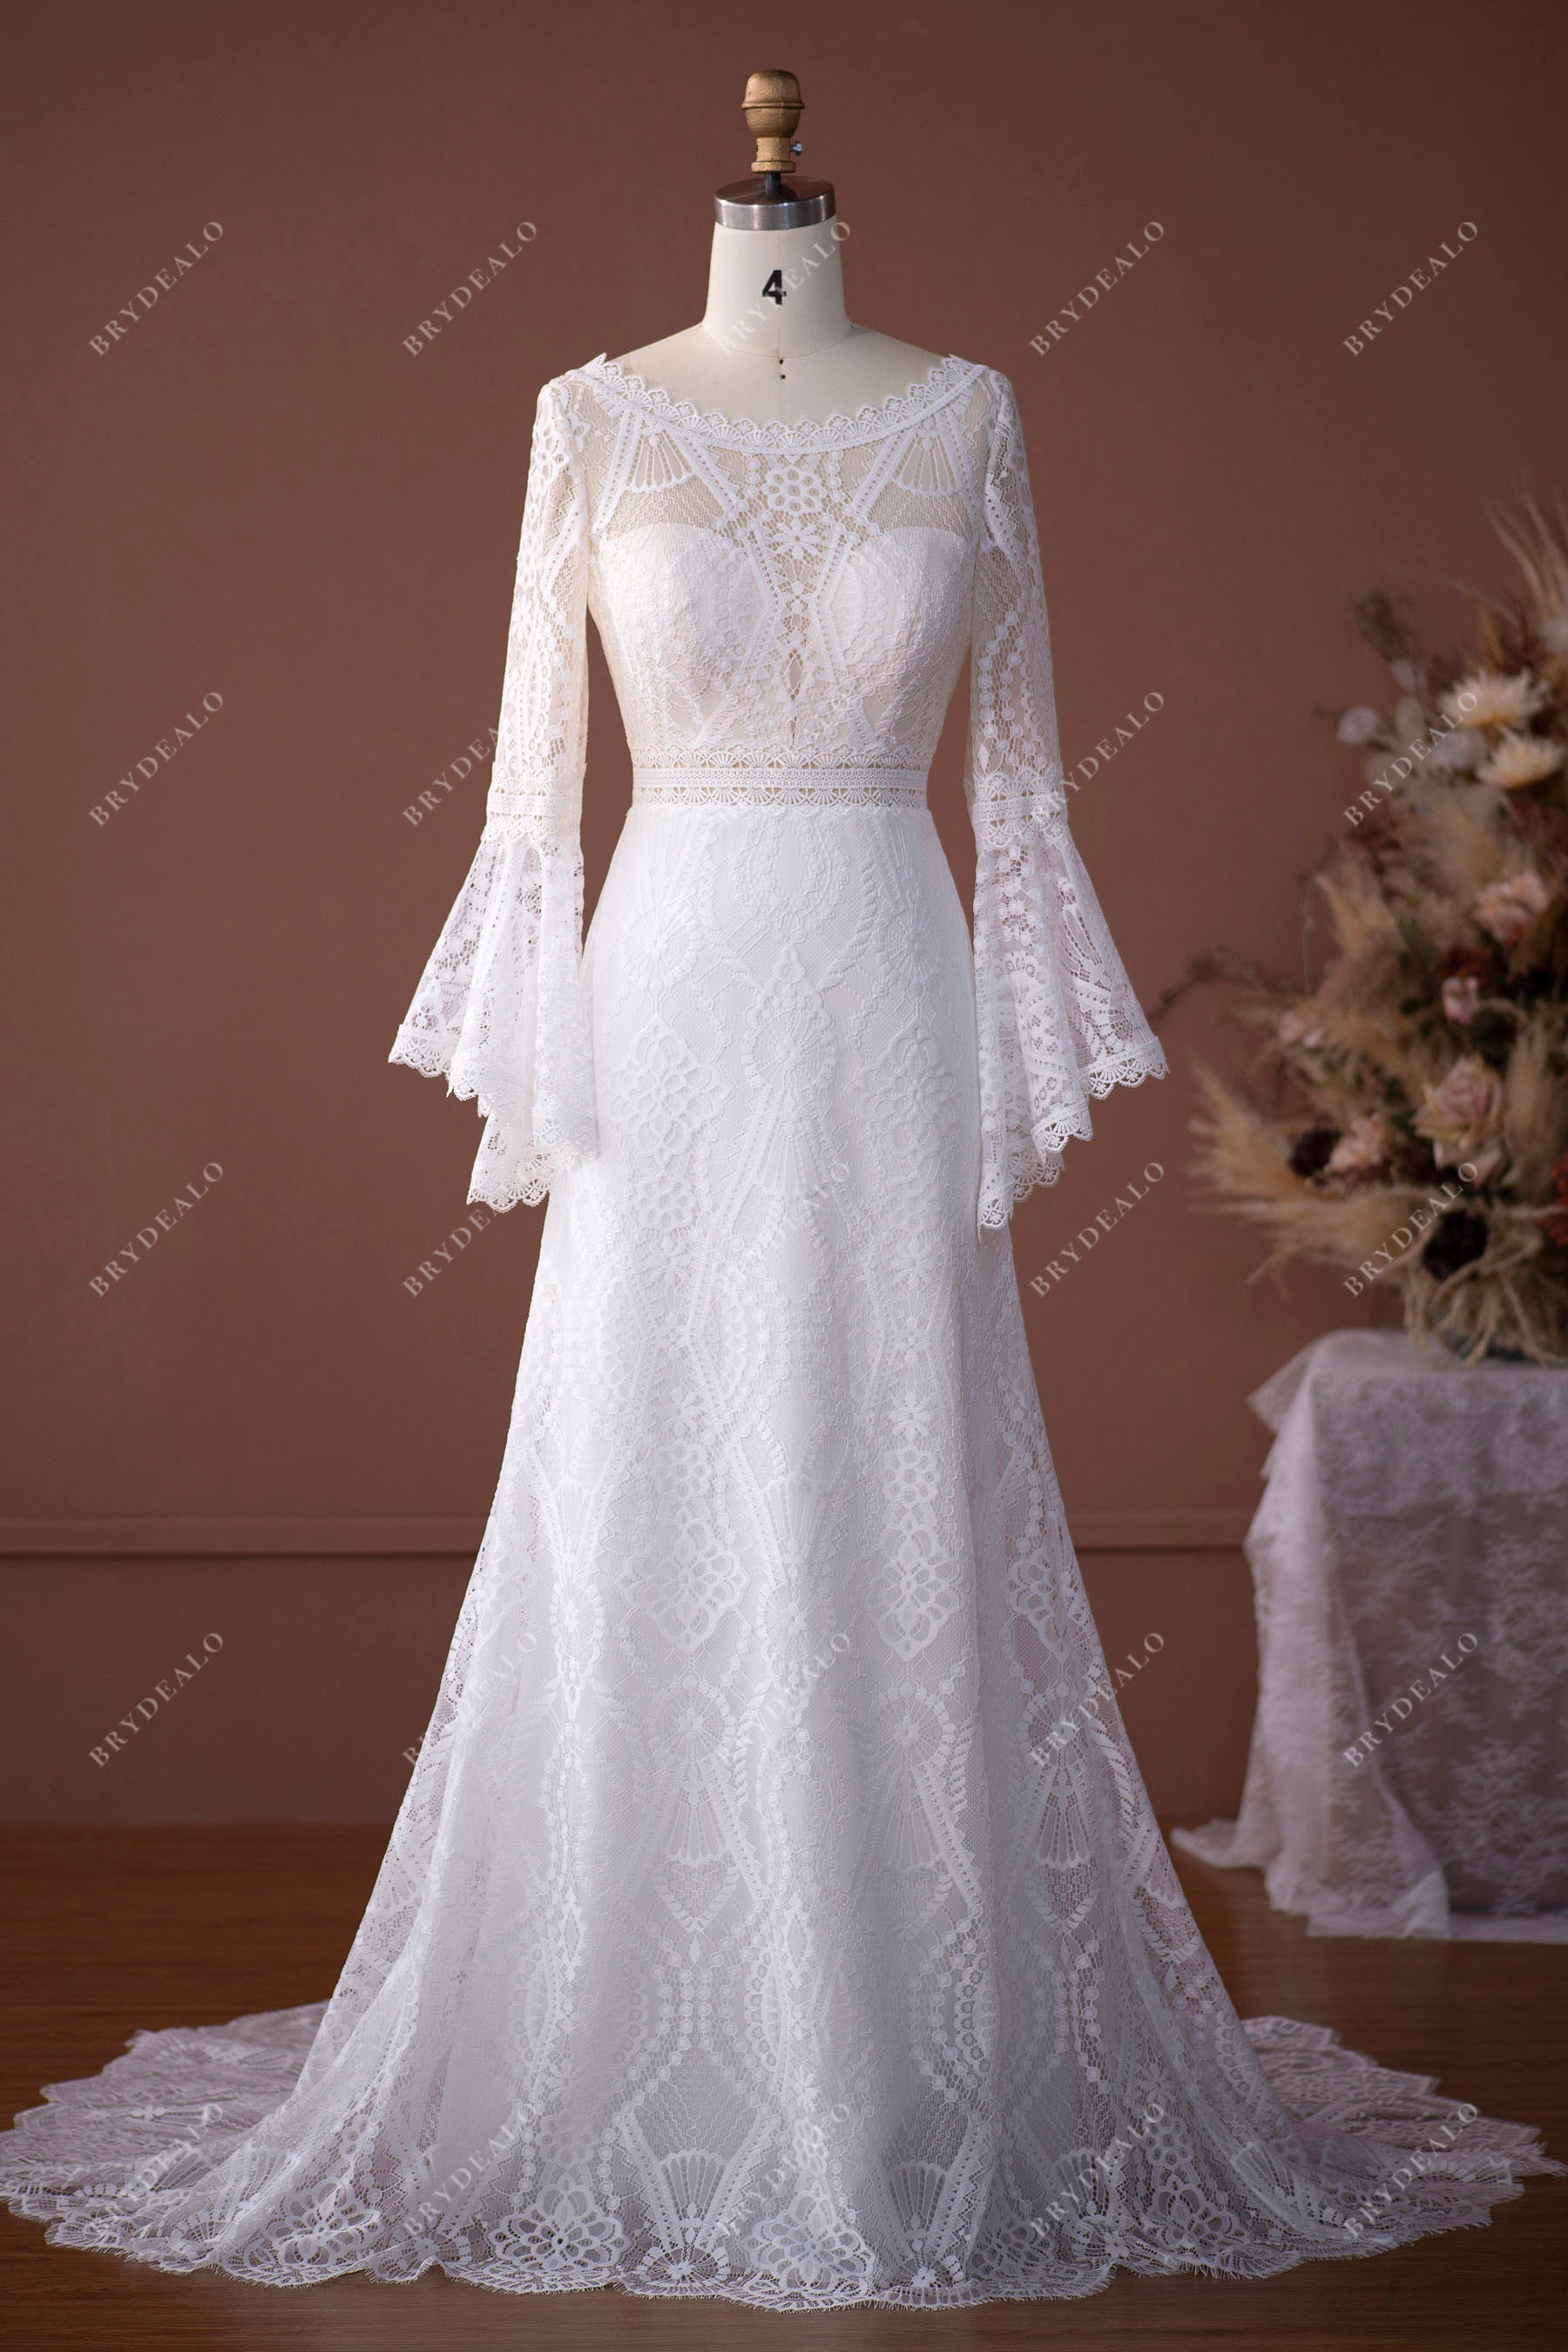 Lace Bell Sleeves Illusion Scalloped Bridal Dress